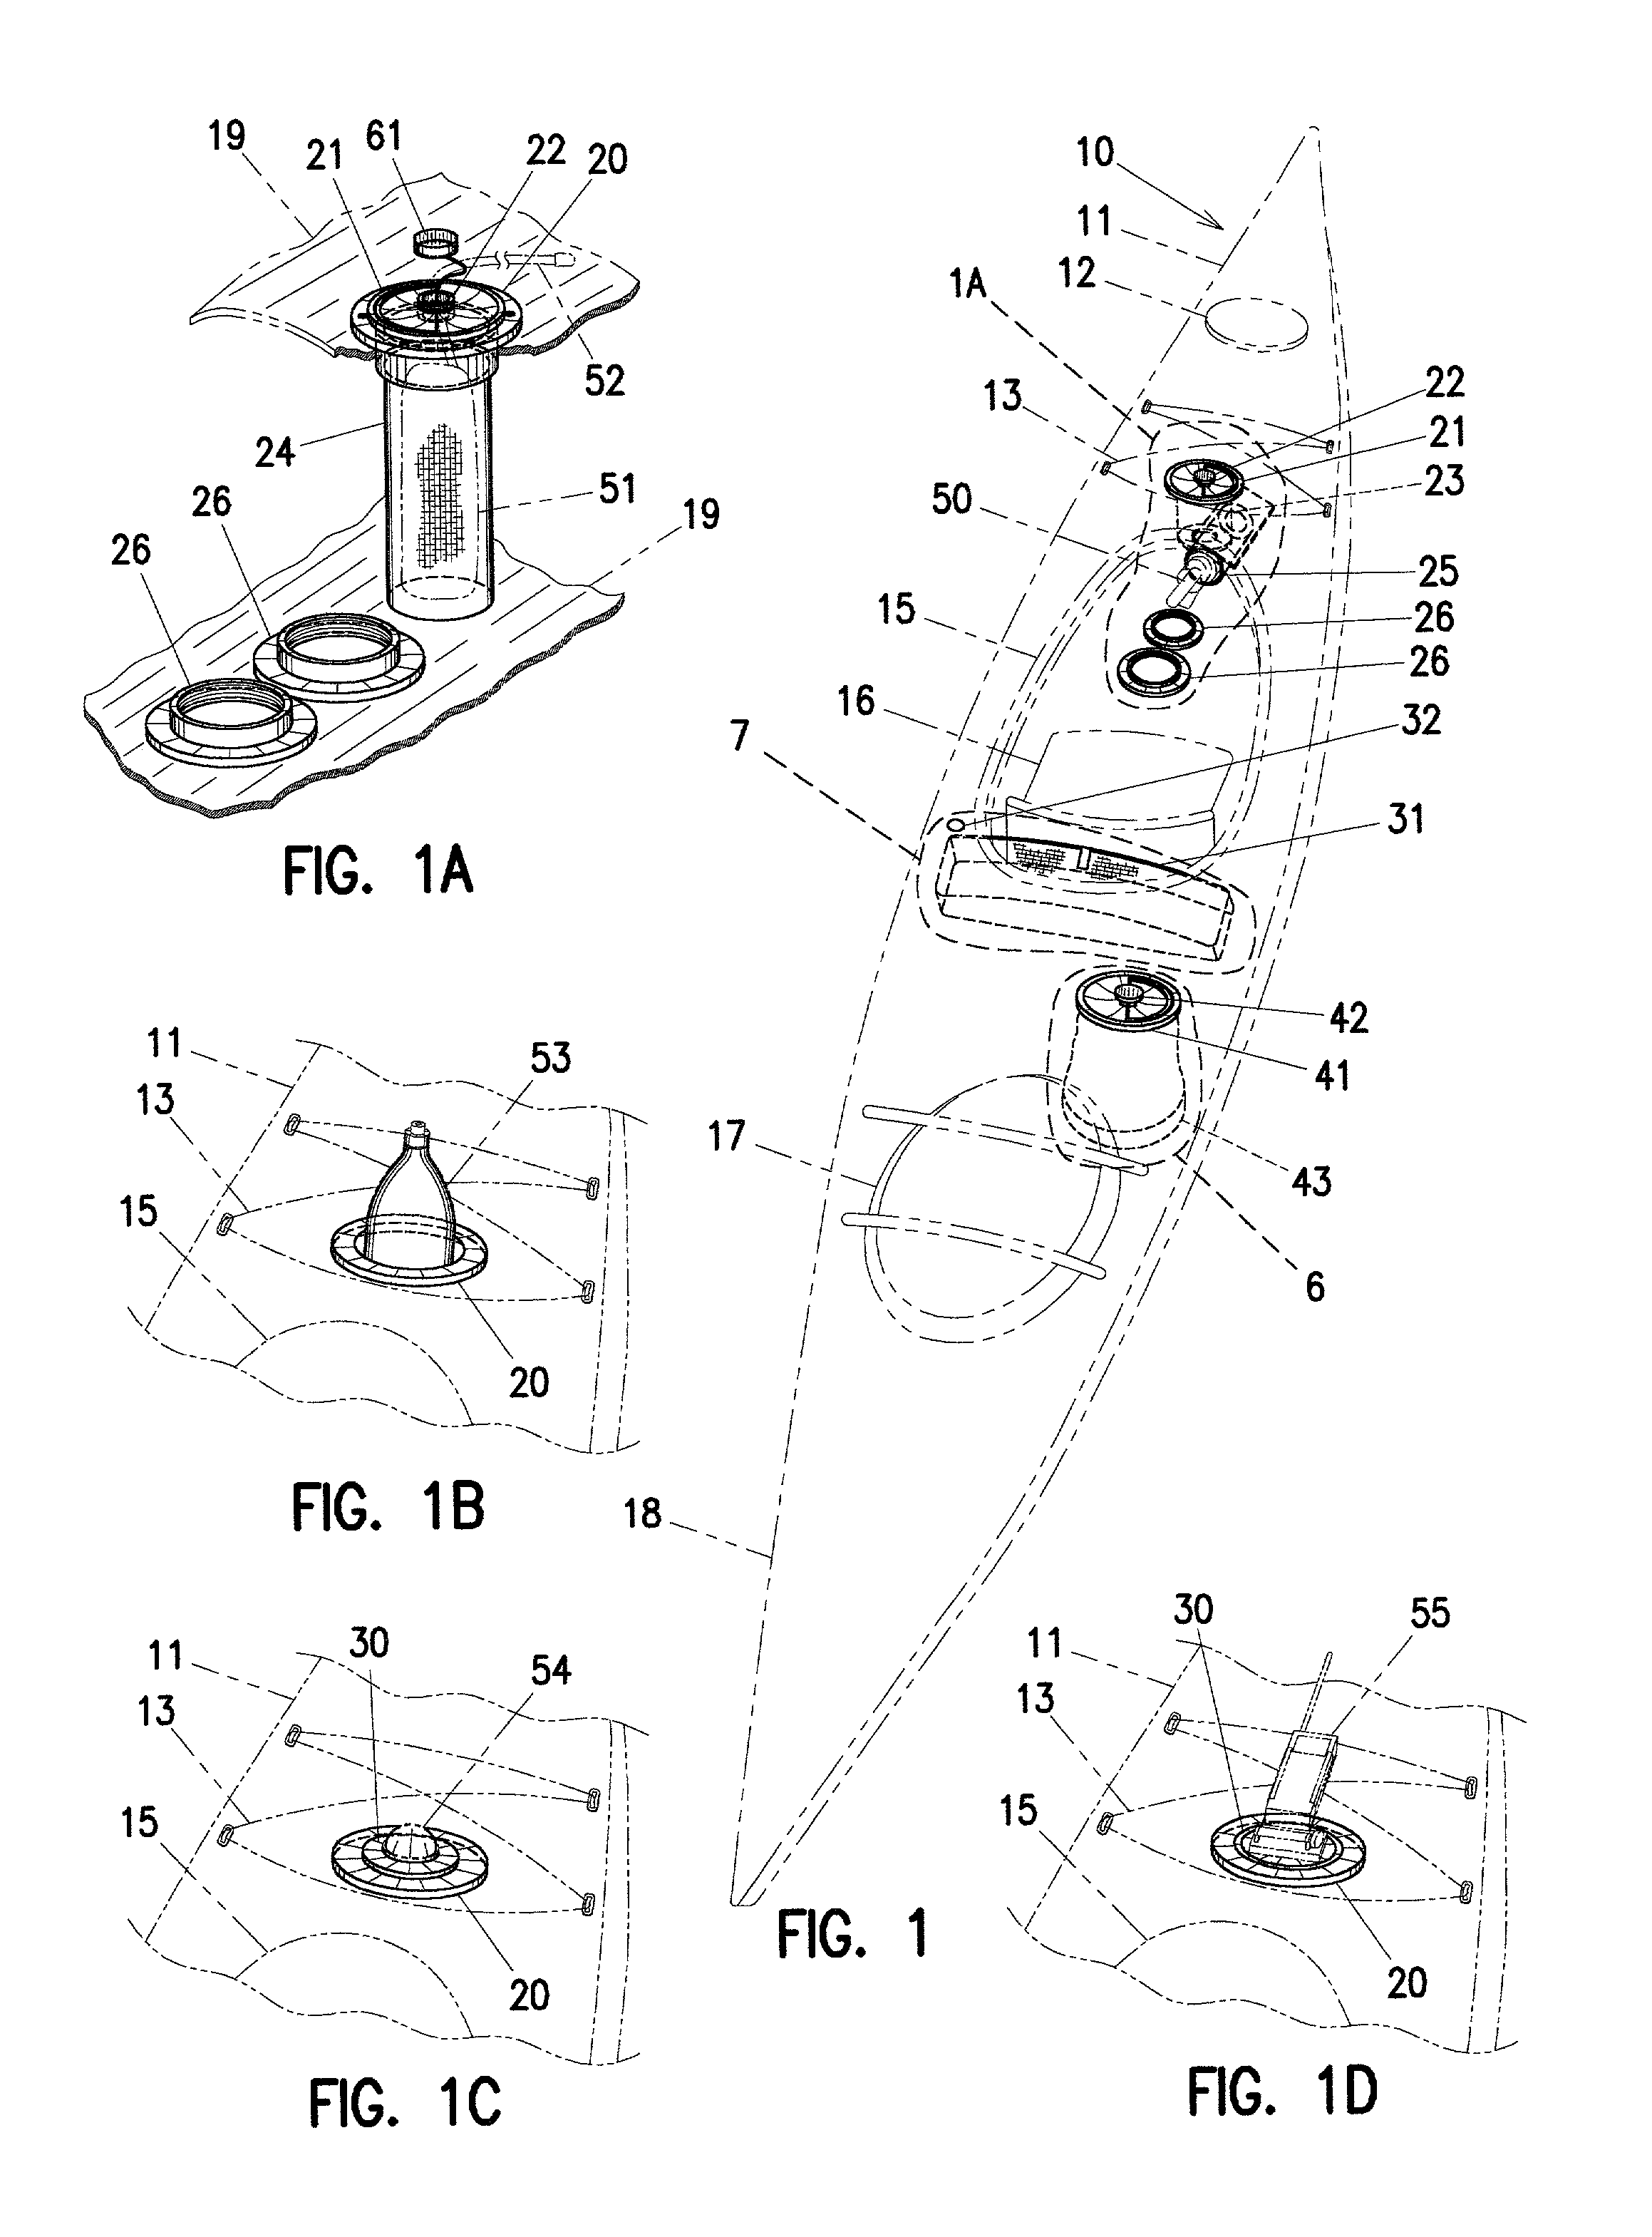 Integrated safety accessory arrangement and components for users of personal watercraft